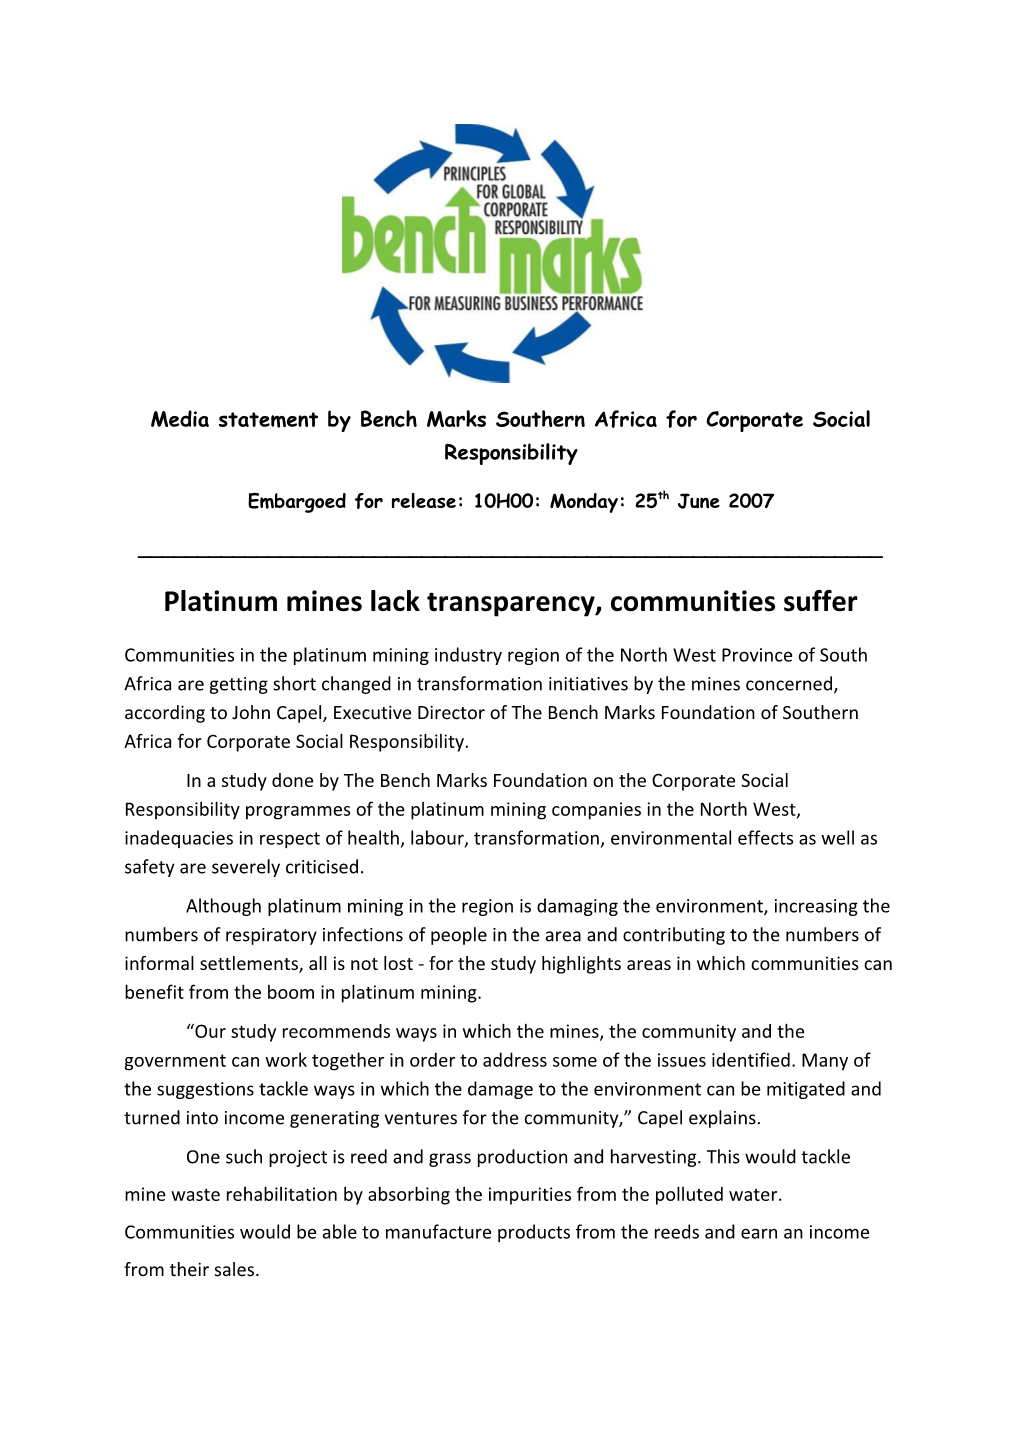 Media Statement by Bench Marks Southern Africa for Corporate Social Responsibility